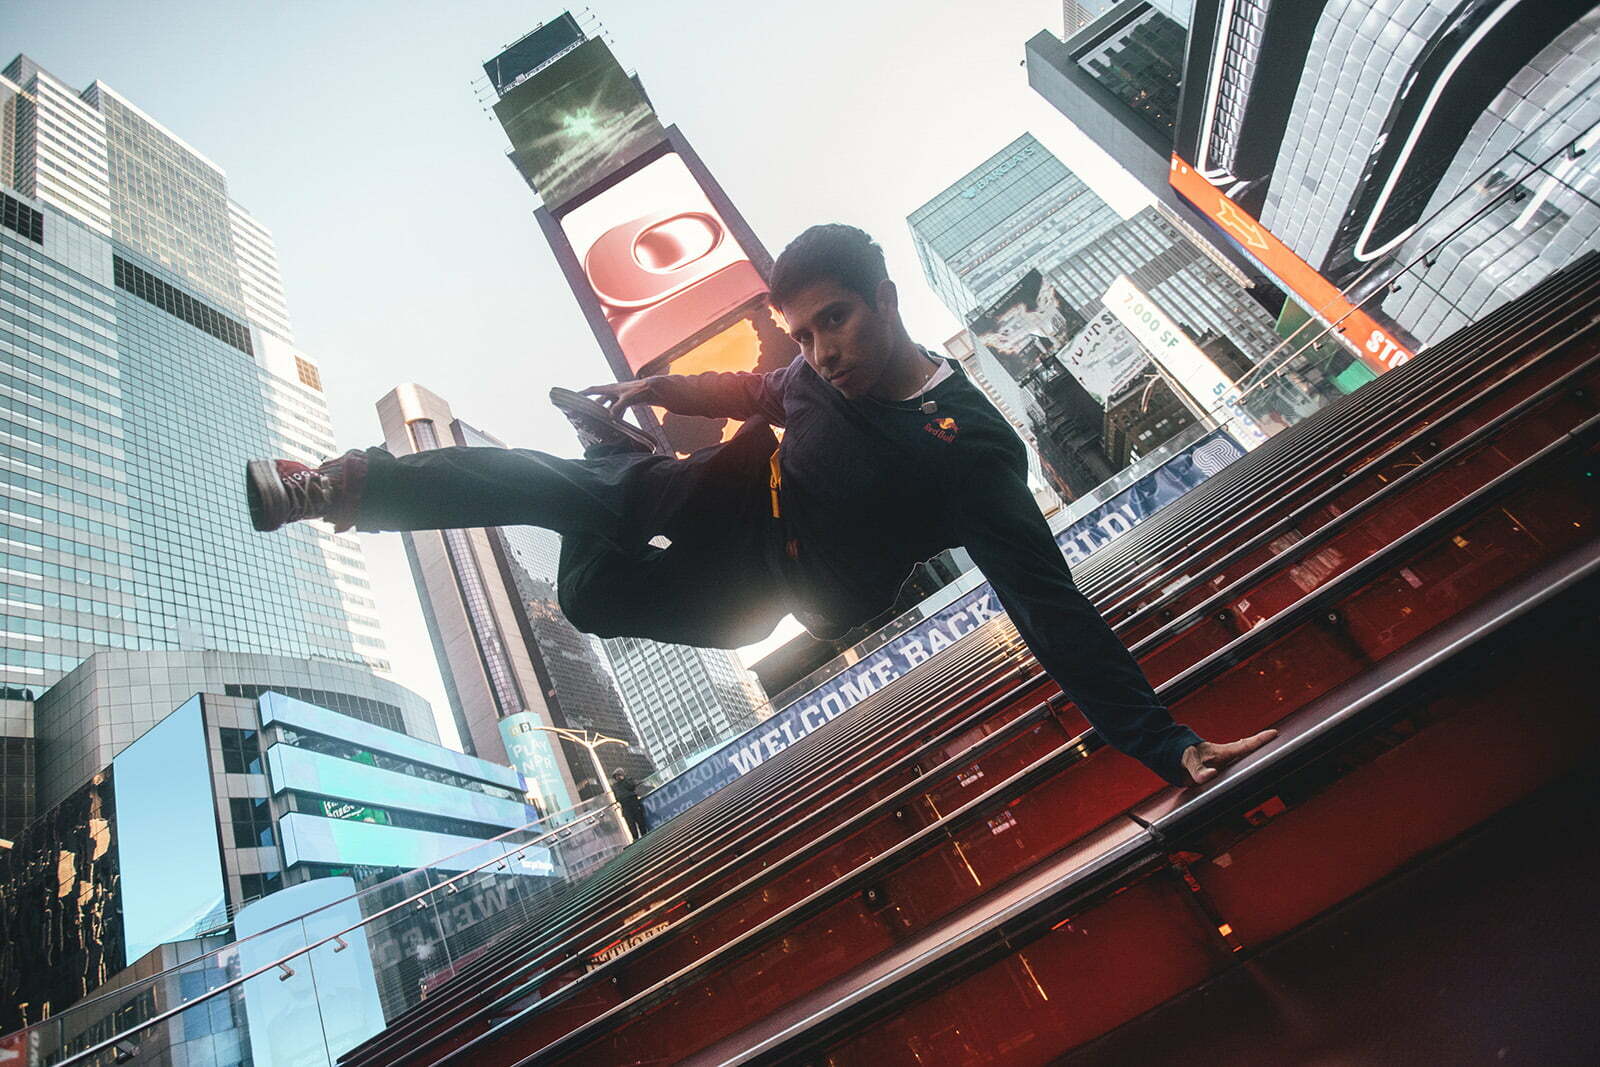 B-Boy Victor poses for a portrait at Red Bull BC One World Final New York 2022 in New York, USA on February 10, 2022